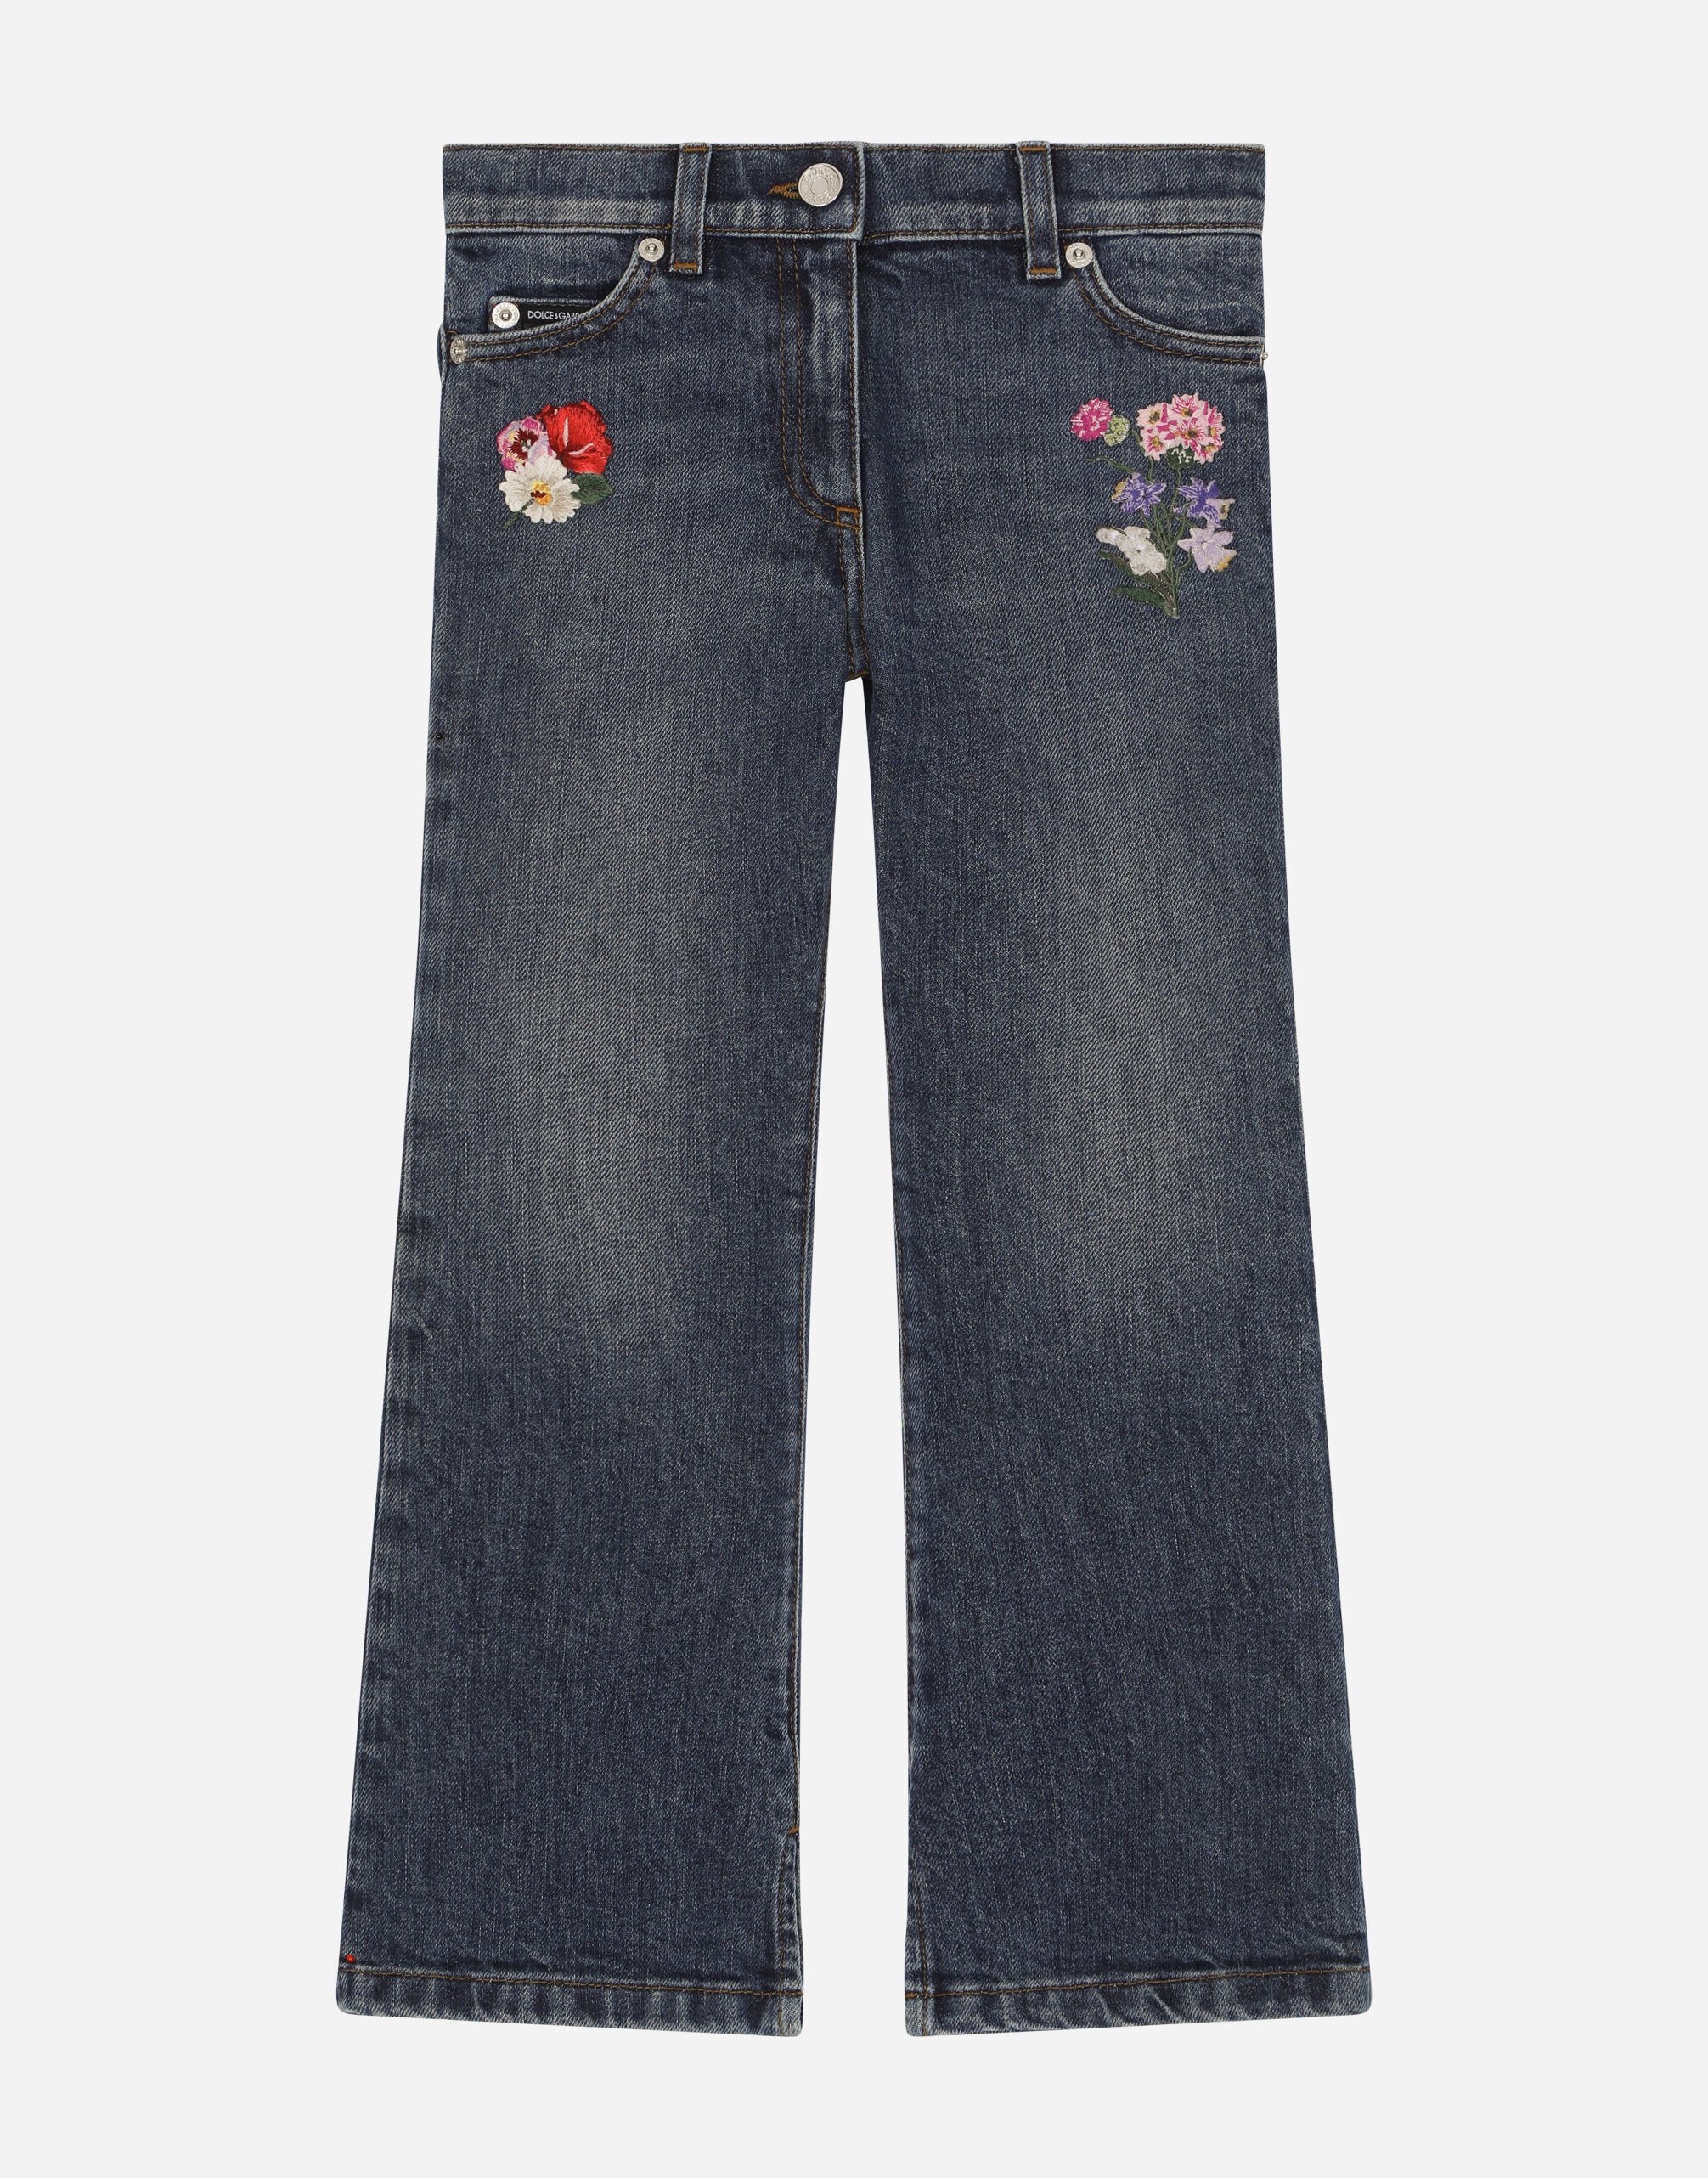 Women's Embroidery Floral Flared Jeans Casual Bell Bottom Long Denim Pants  